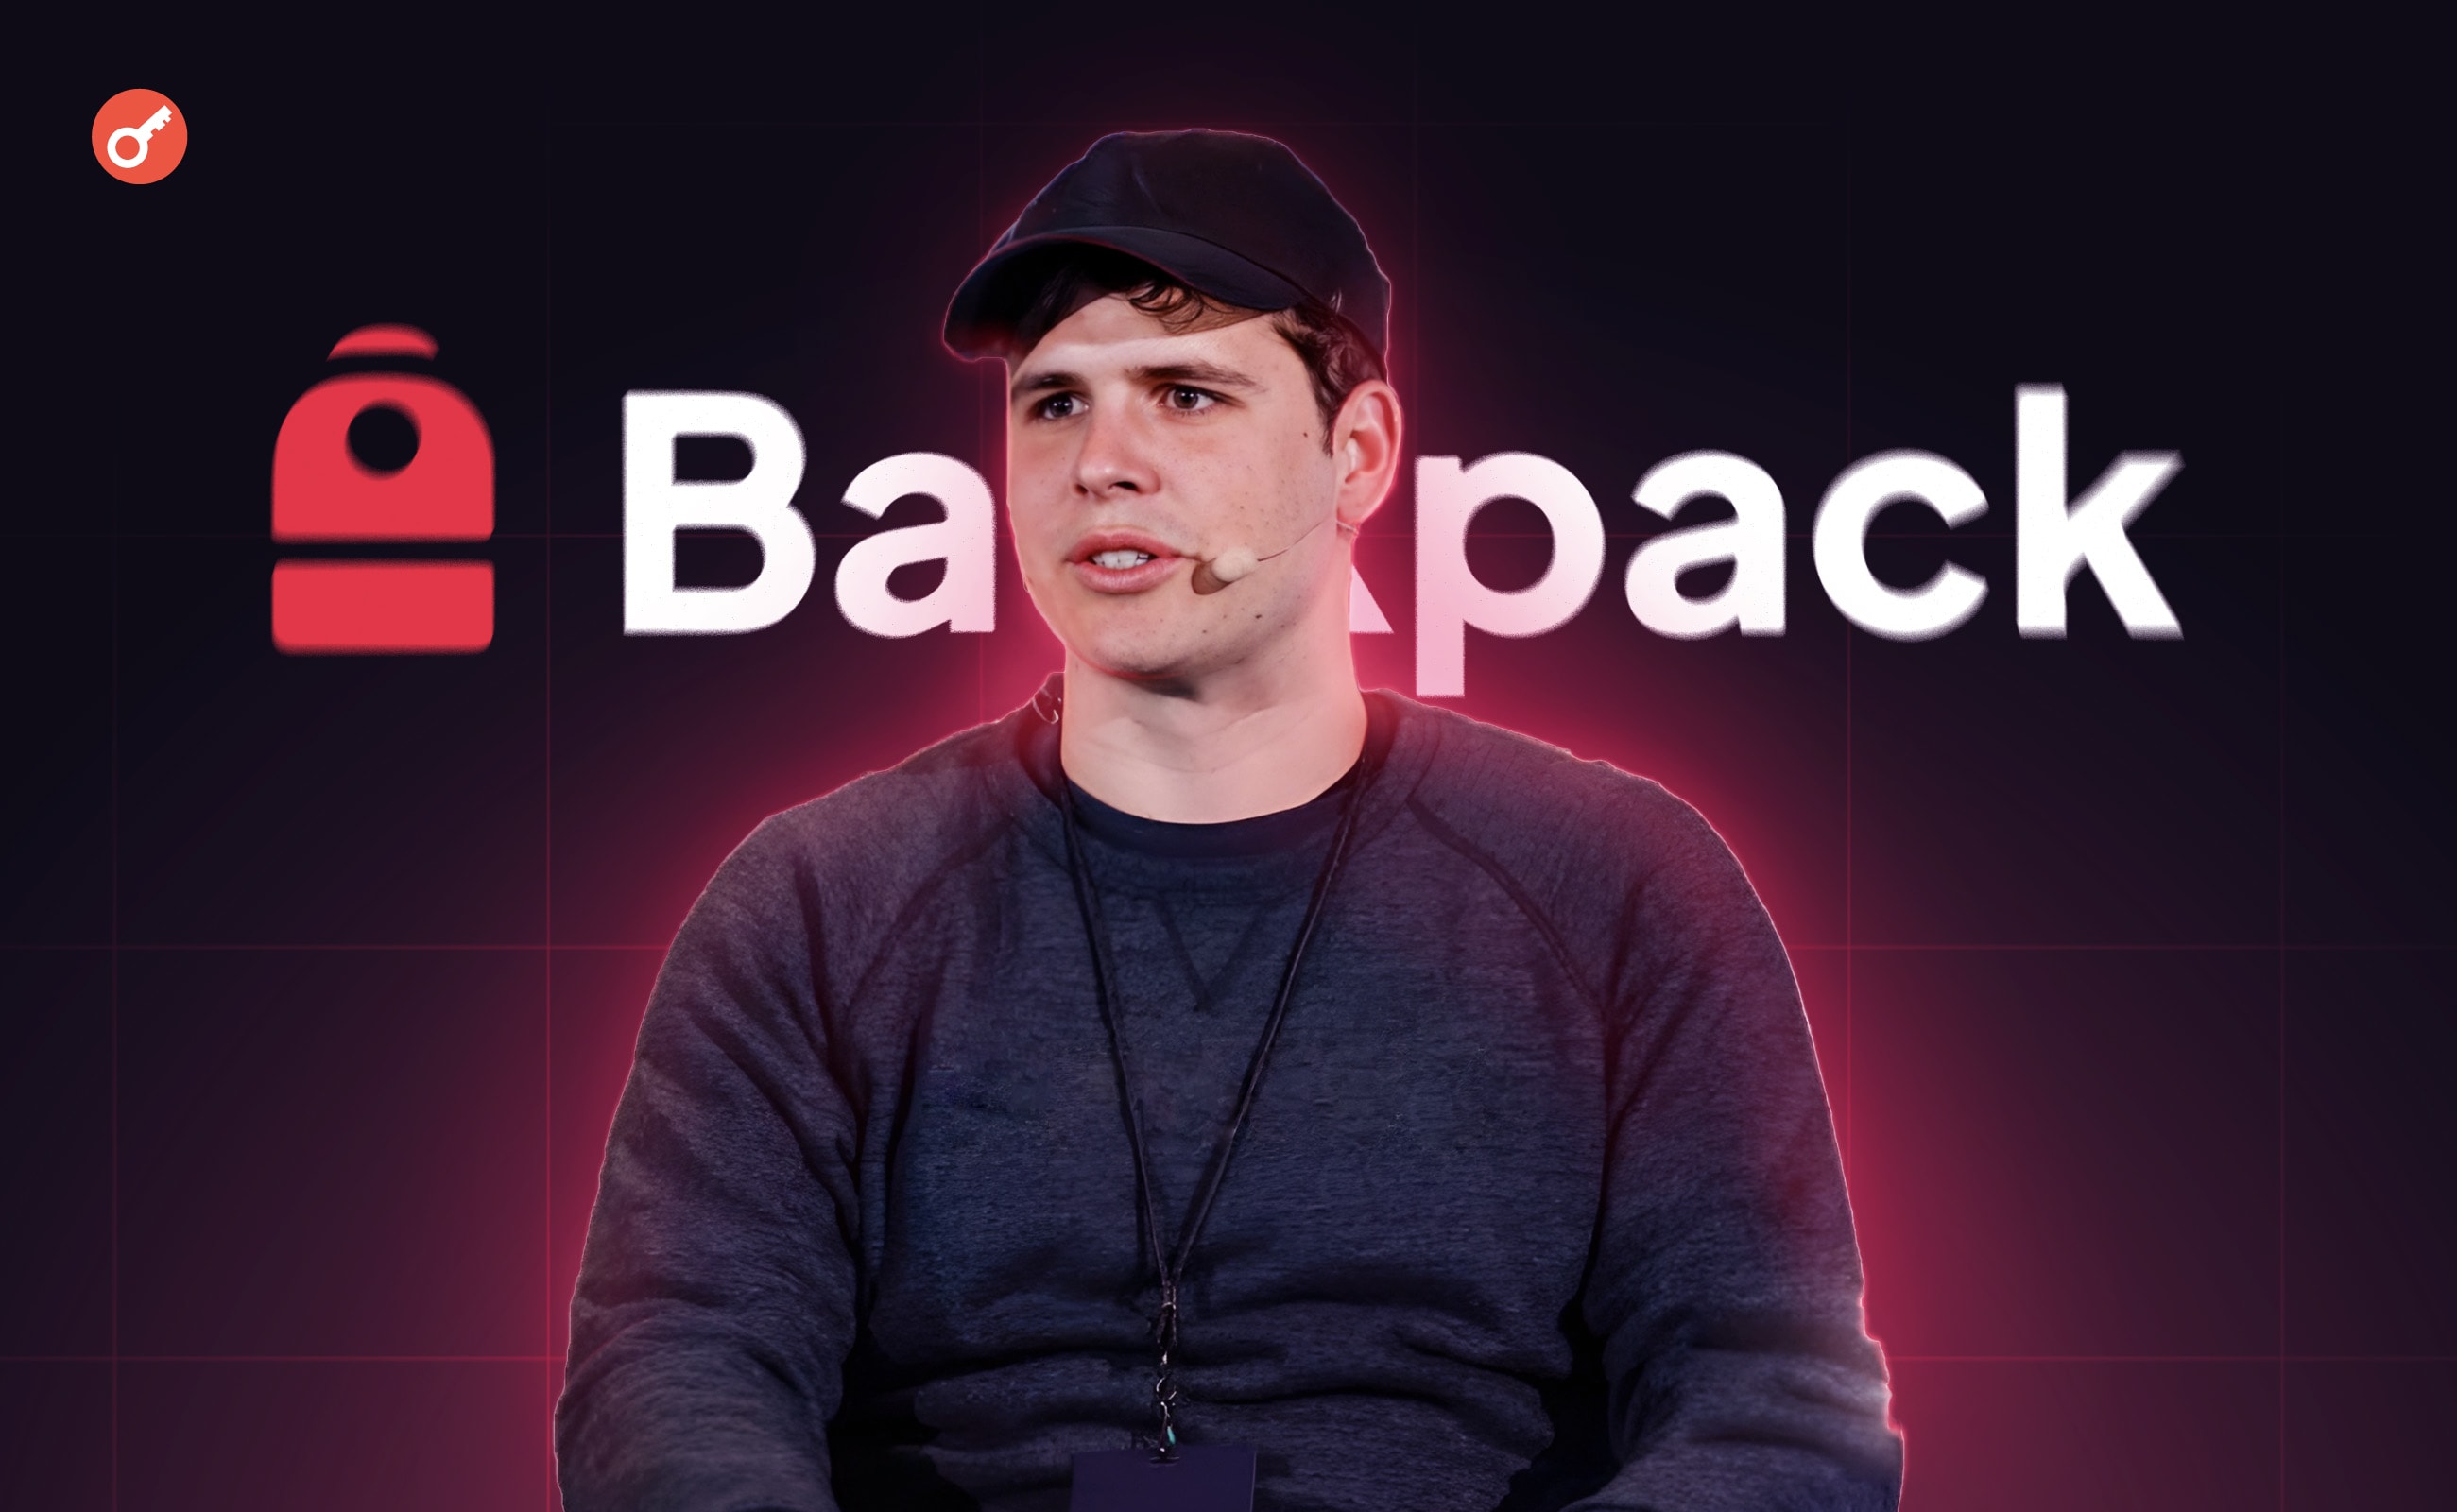 WeChat for crypto: an interview with Backpack co-founder Tristan Yver. Заглавный коллаж статьи.